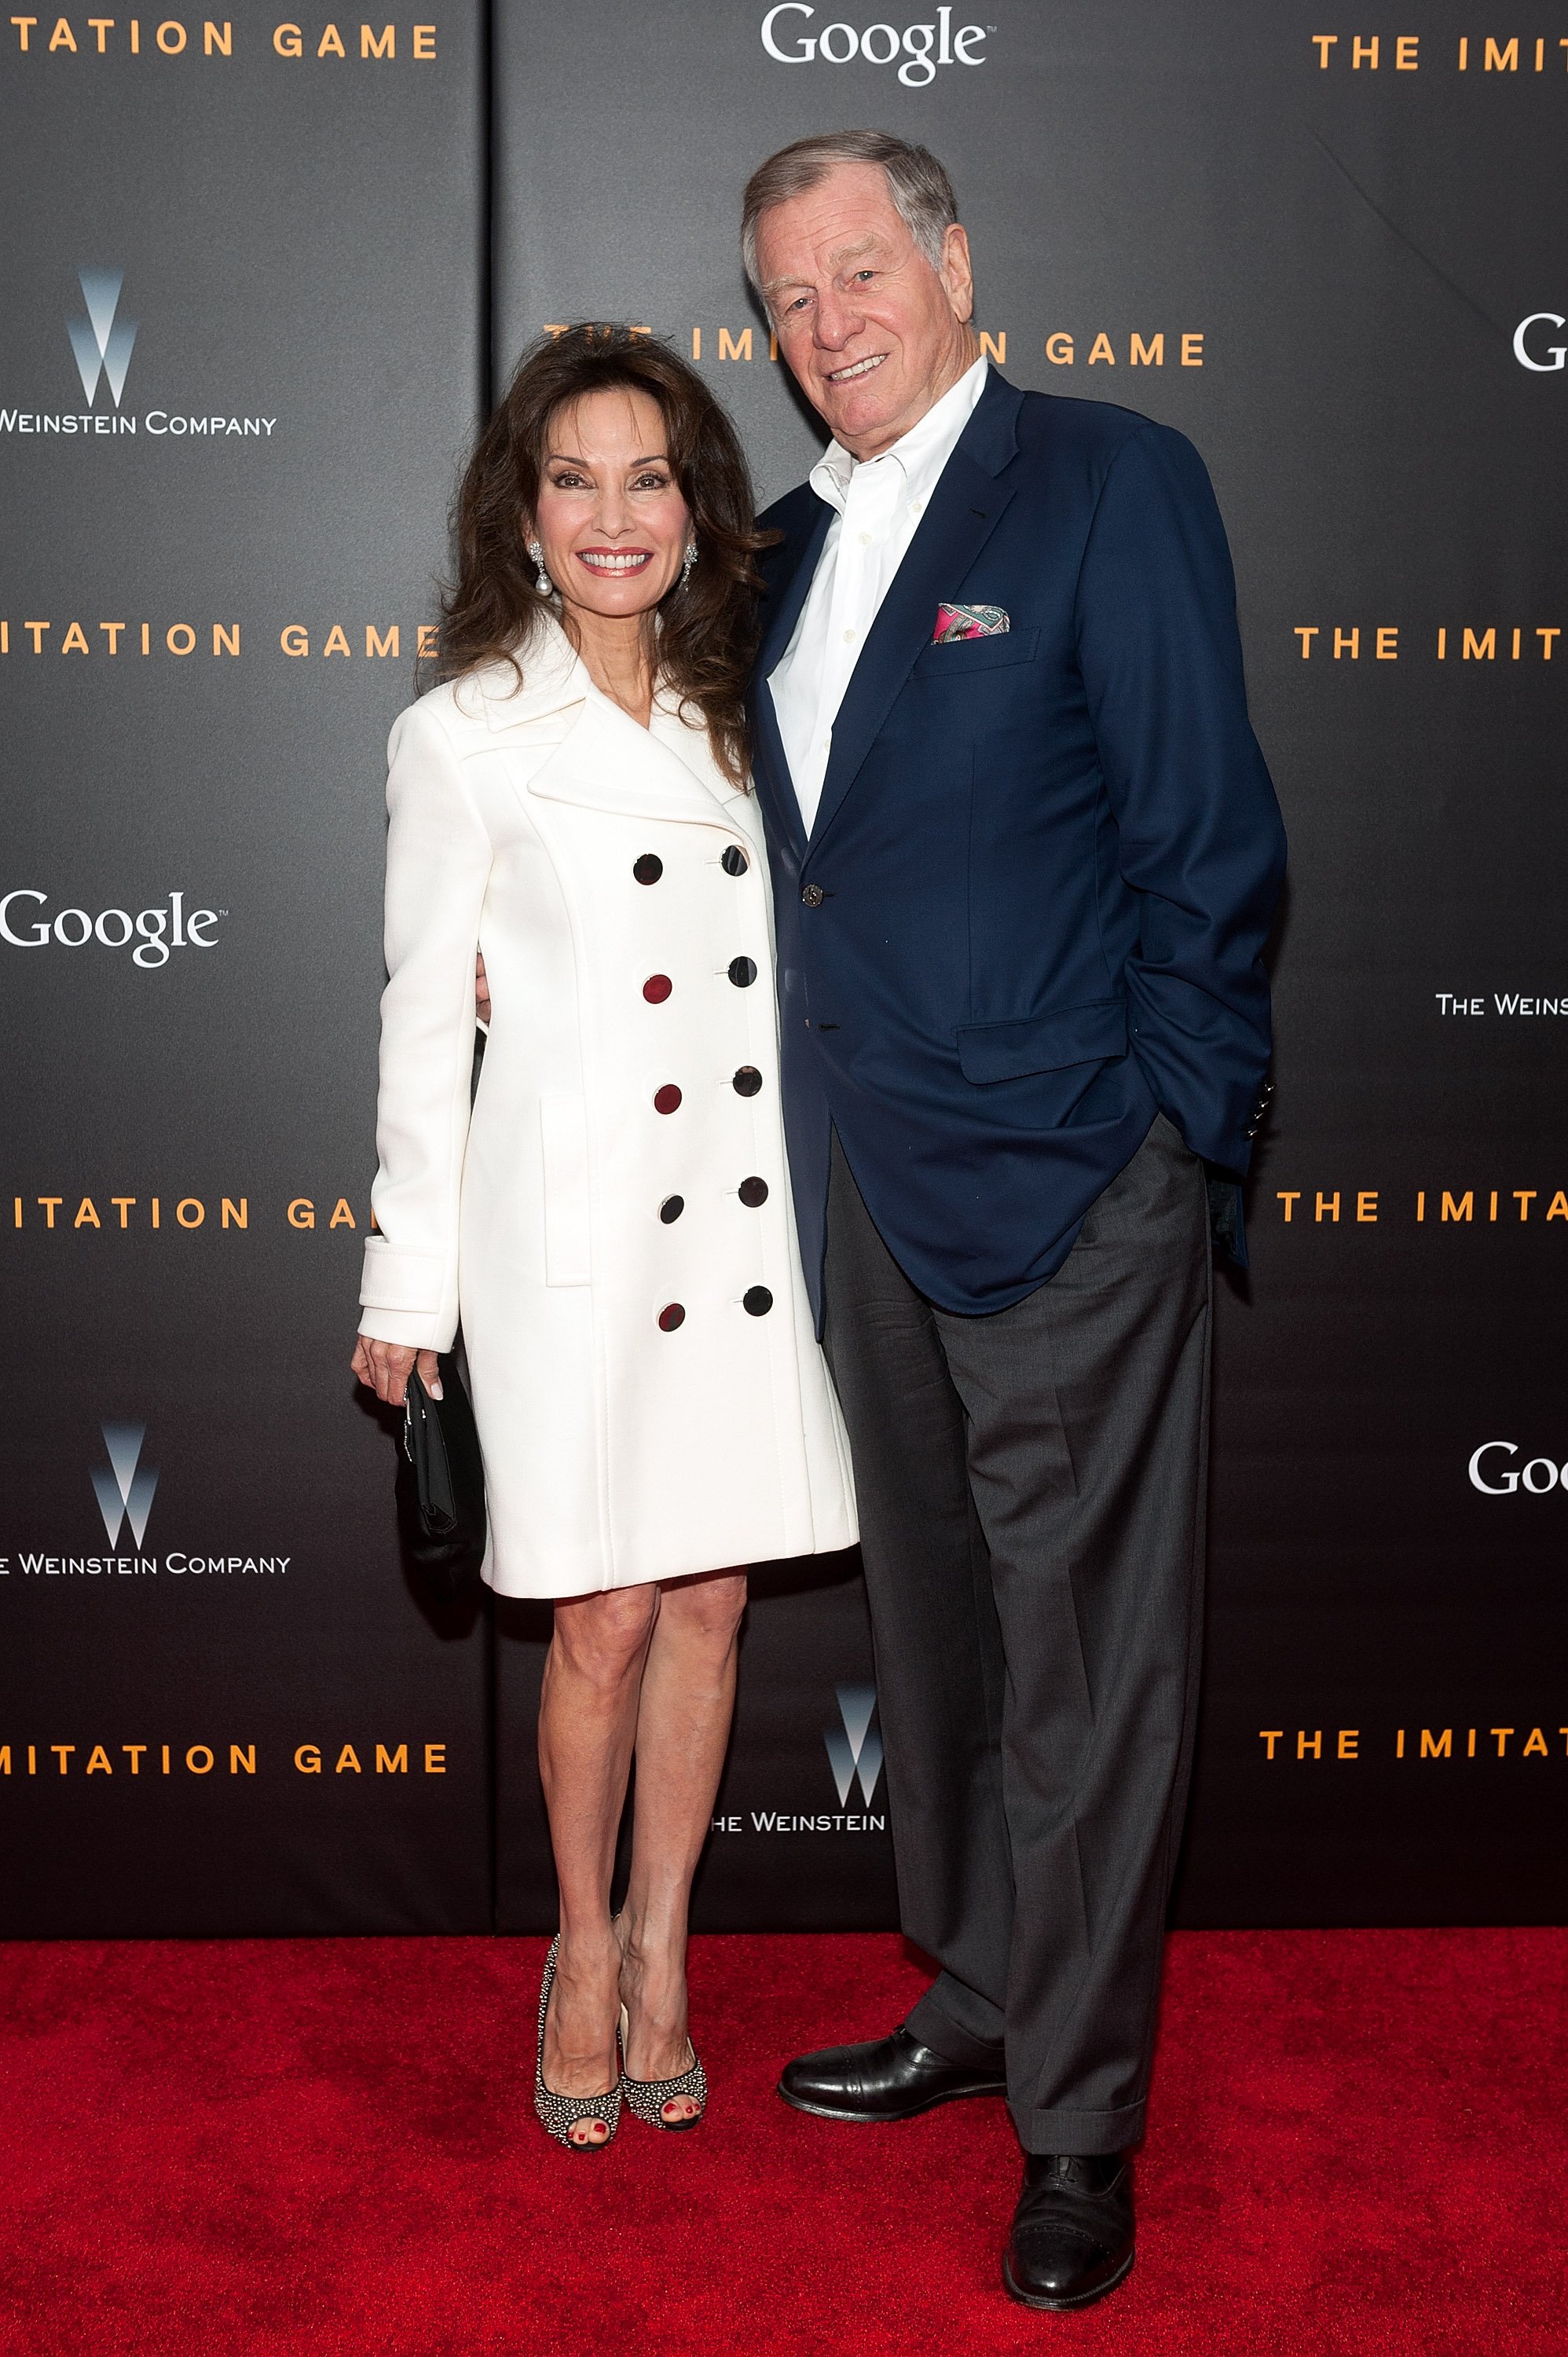 Susan Lucci and her husband Helmut Huber attend "The Imitation Game" New York Premiere at the Ziegfeld Theater on November 17, 2014, in New York City. | Source: Getty Images